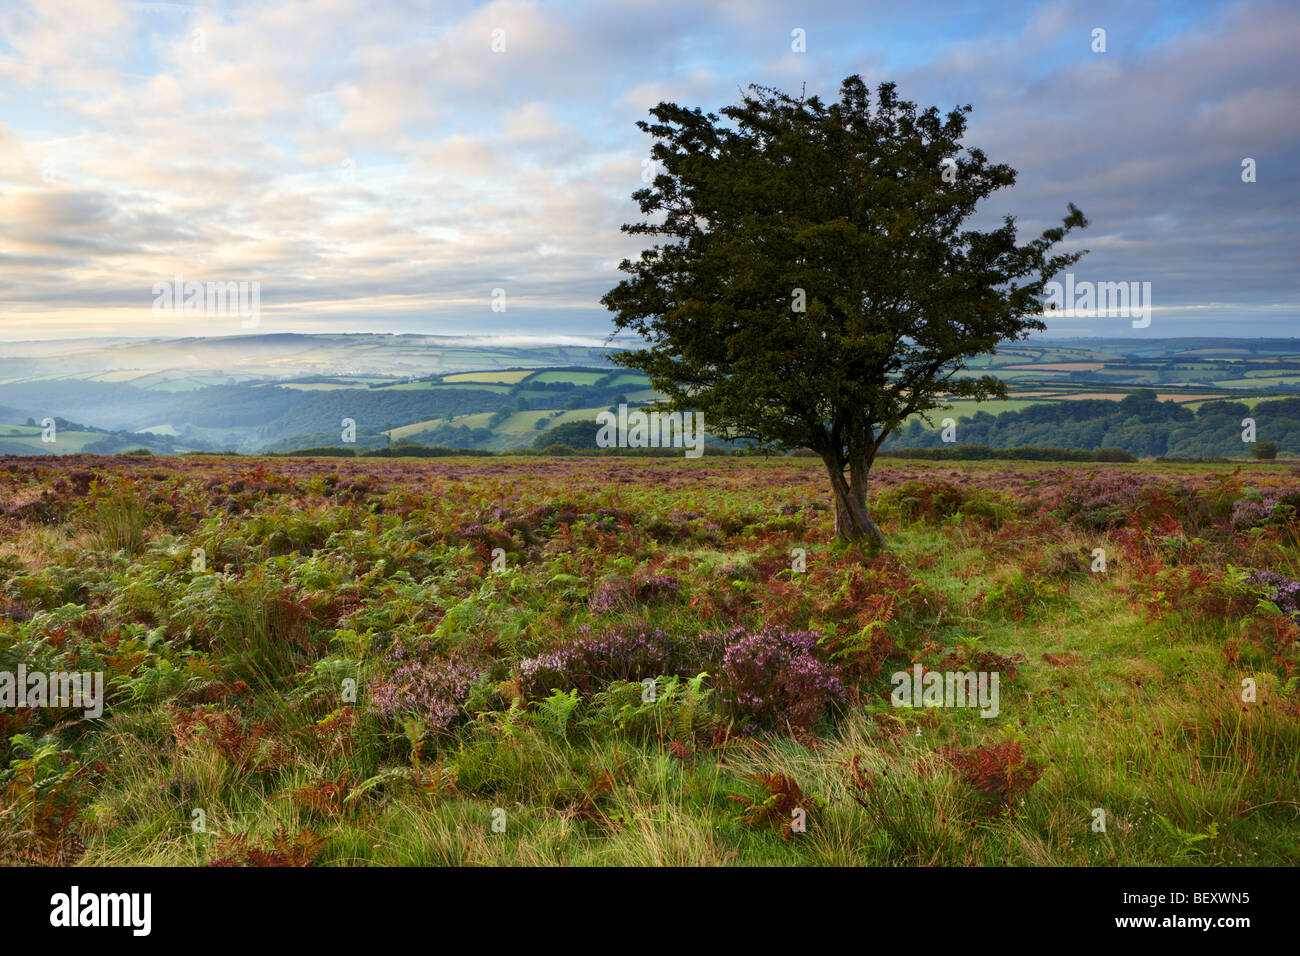 View from Dunkery Hill overlooking Exmoor National Park. Stock Photo